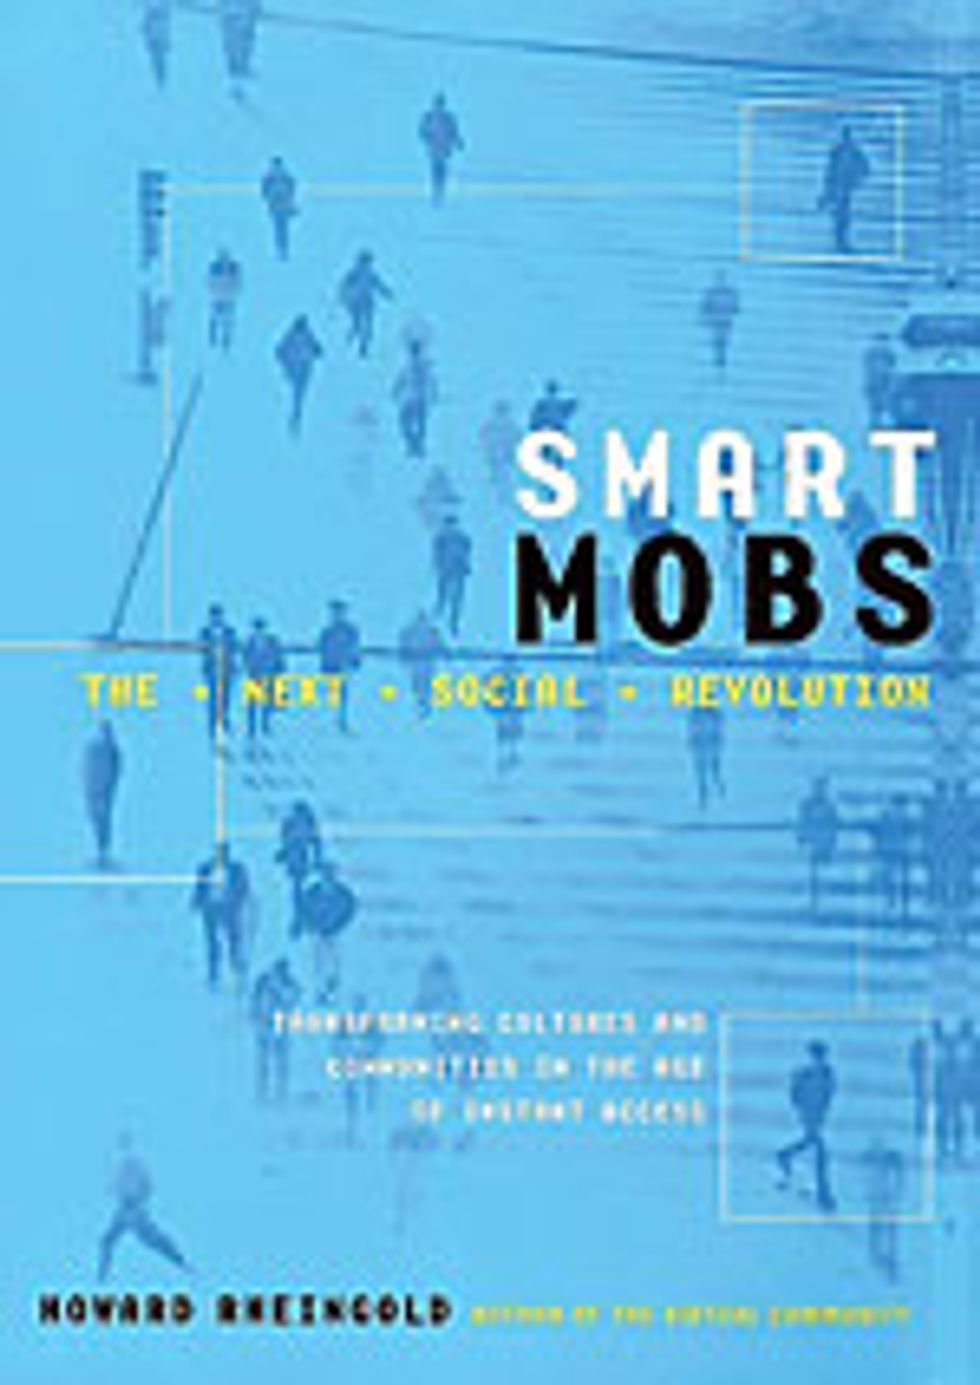 book cover, smart mobs